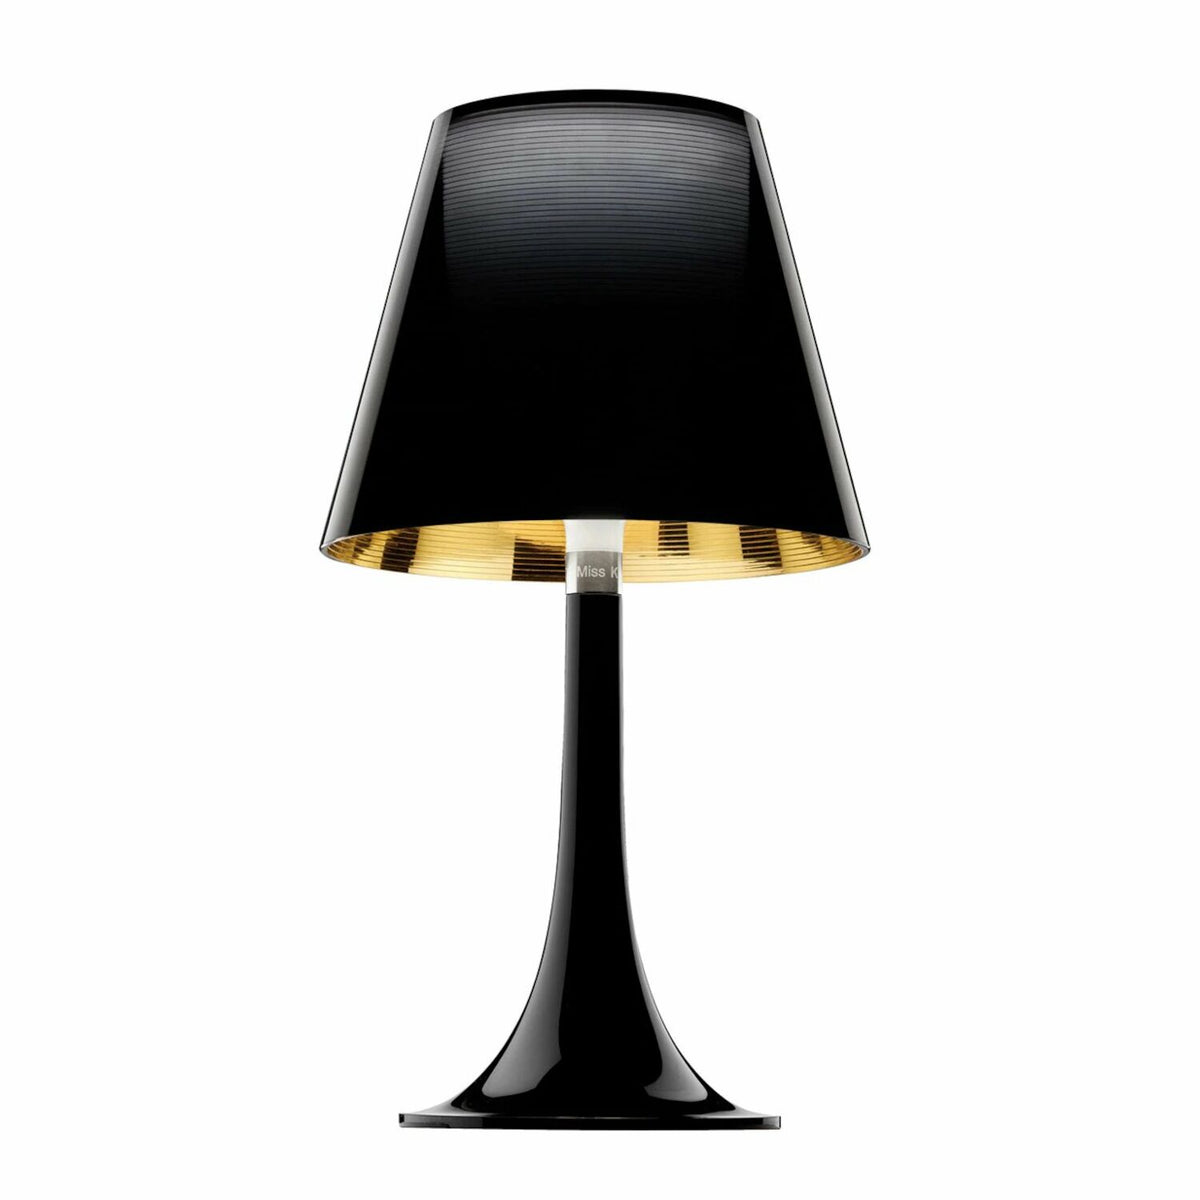 MISS K TABLE LAMP BY PHILIPPE STARCK